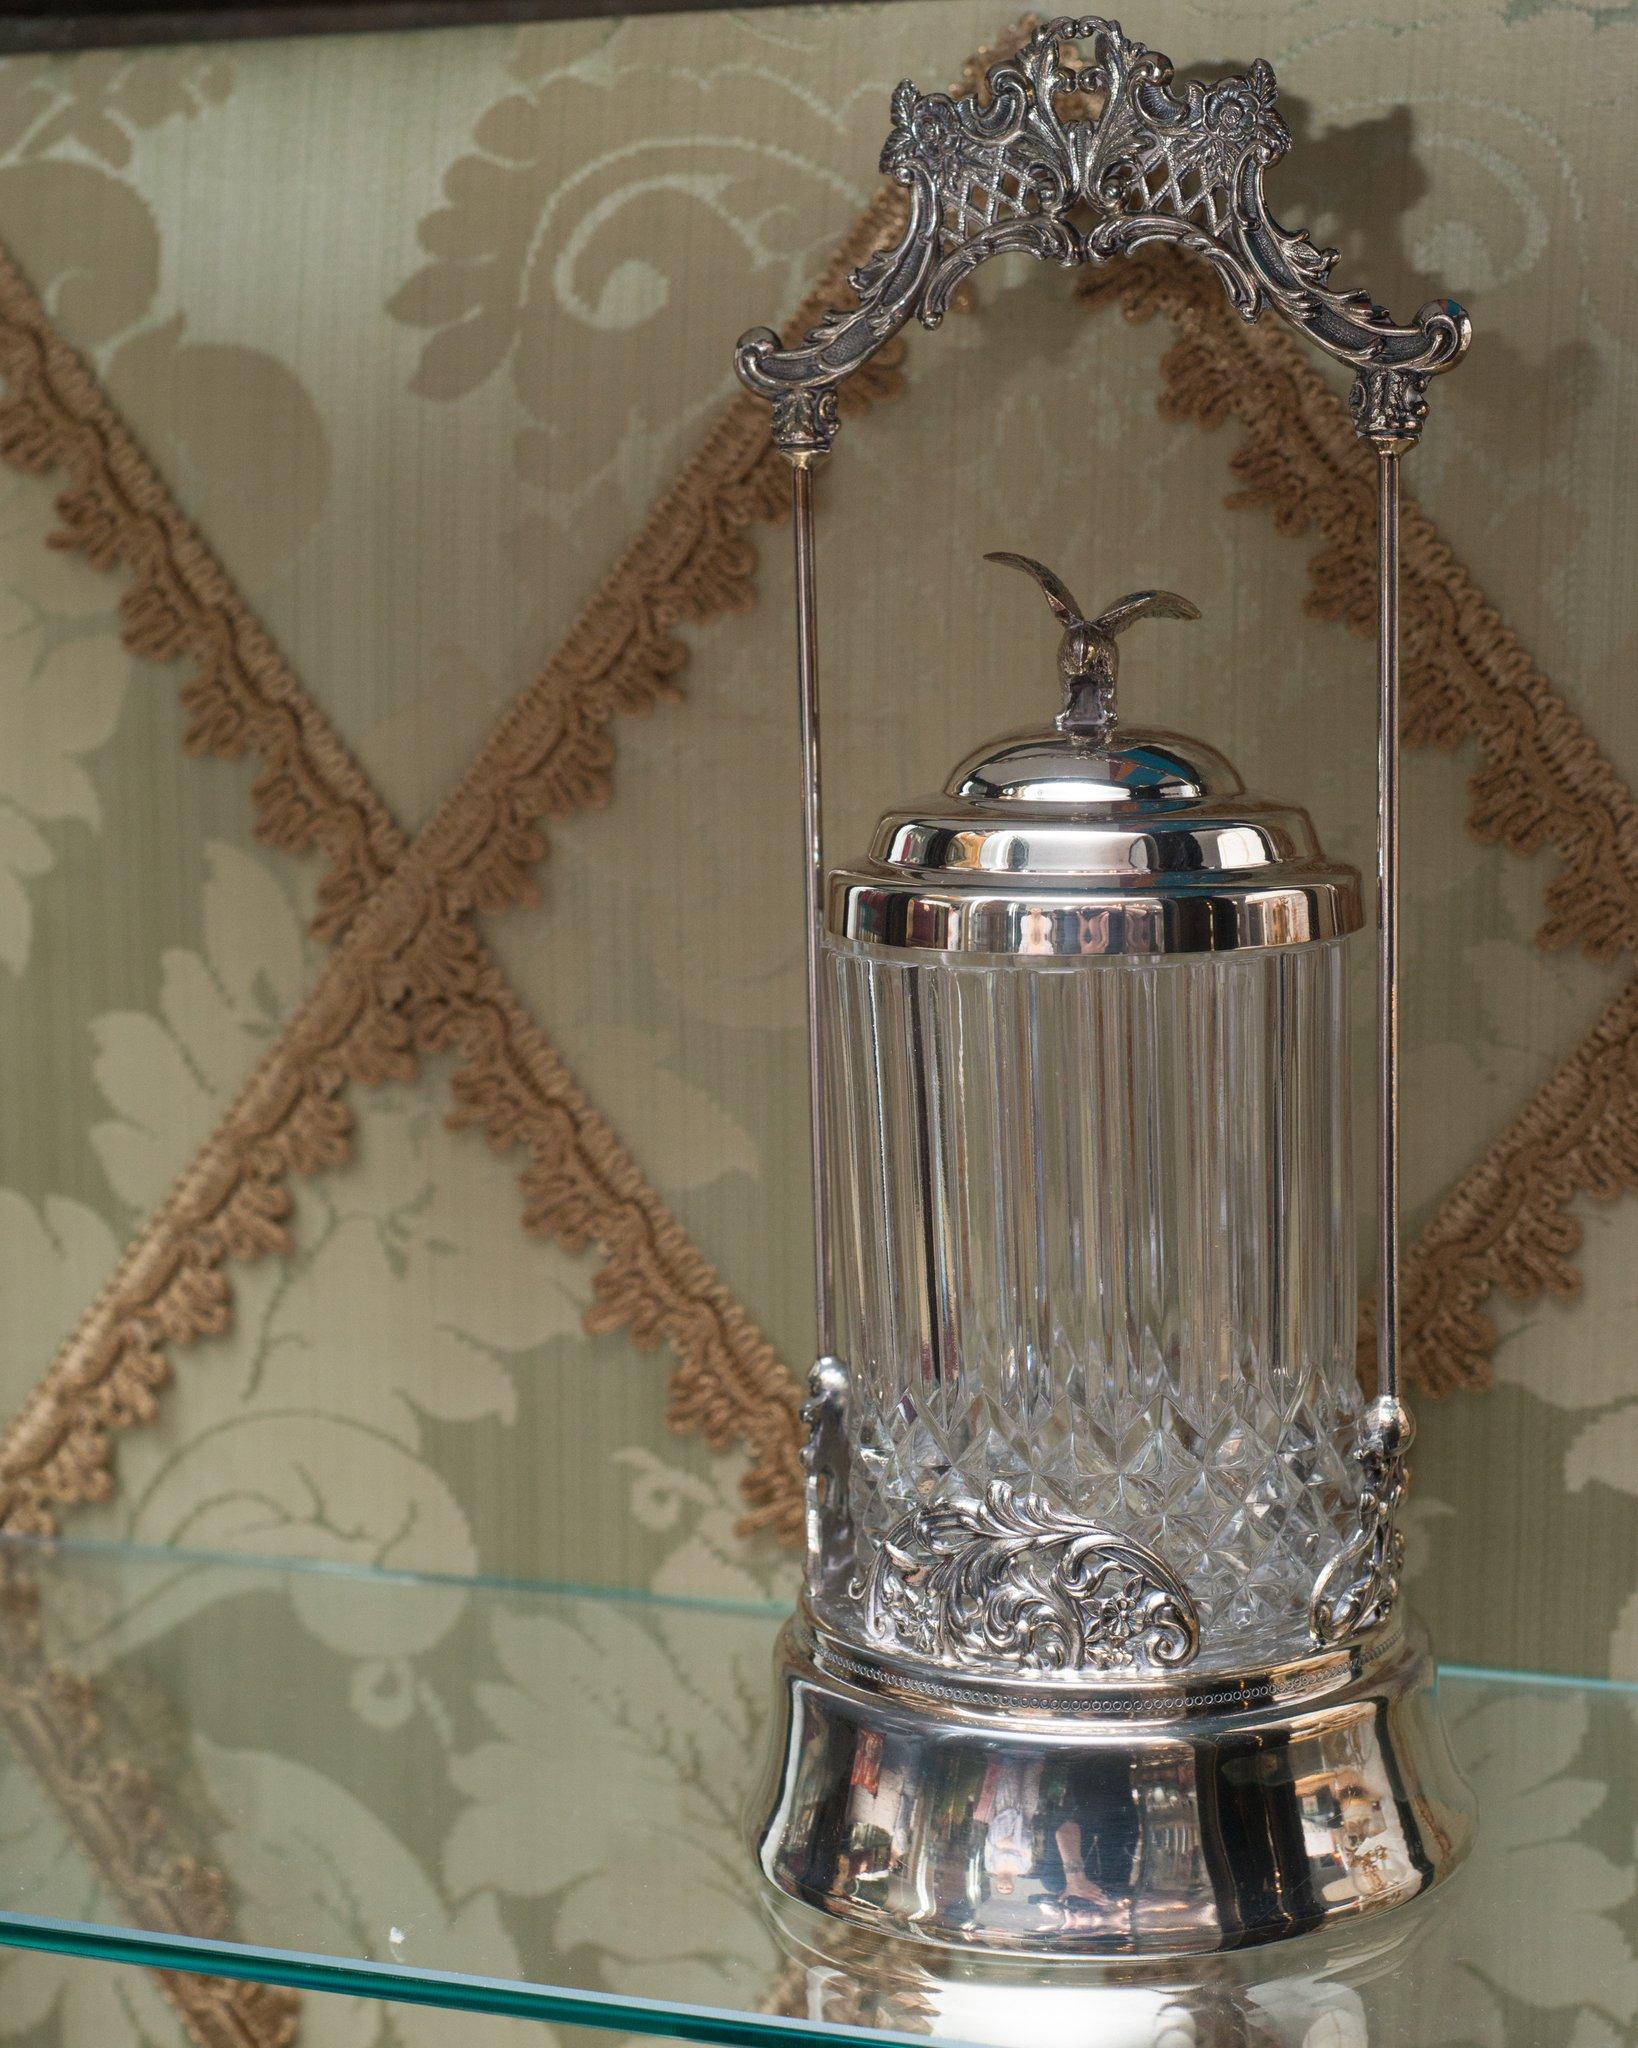 In recent years pickling has enjoyed a revival. Placed in a contemporary kitchen, filled with pickled vegetables in vibrant colors, this antique silver plate and crystal pickle jar with eagle finial adds value and becomes alive.